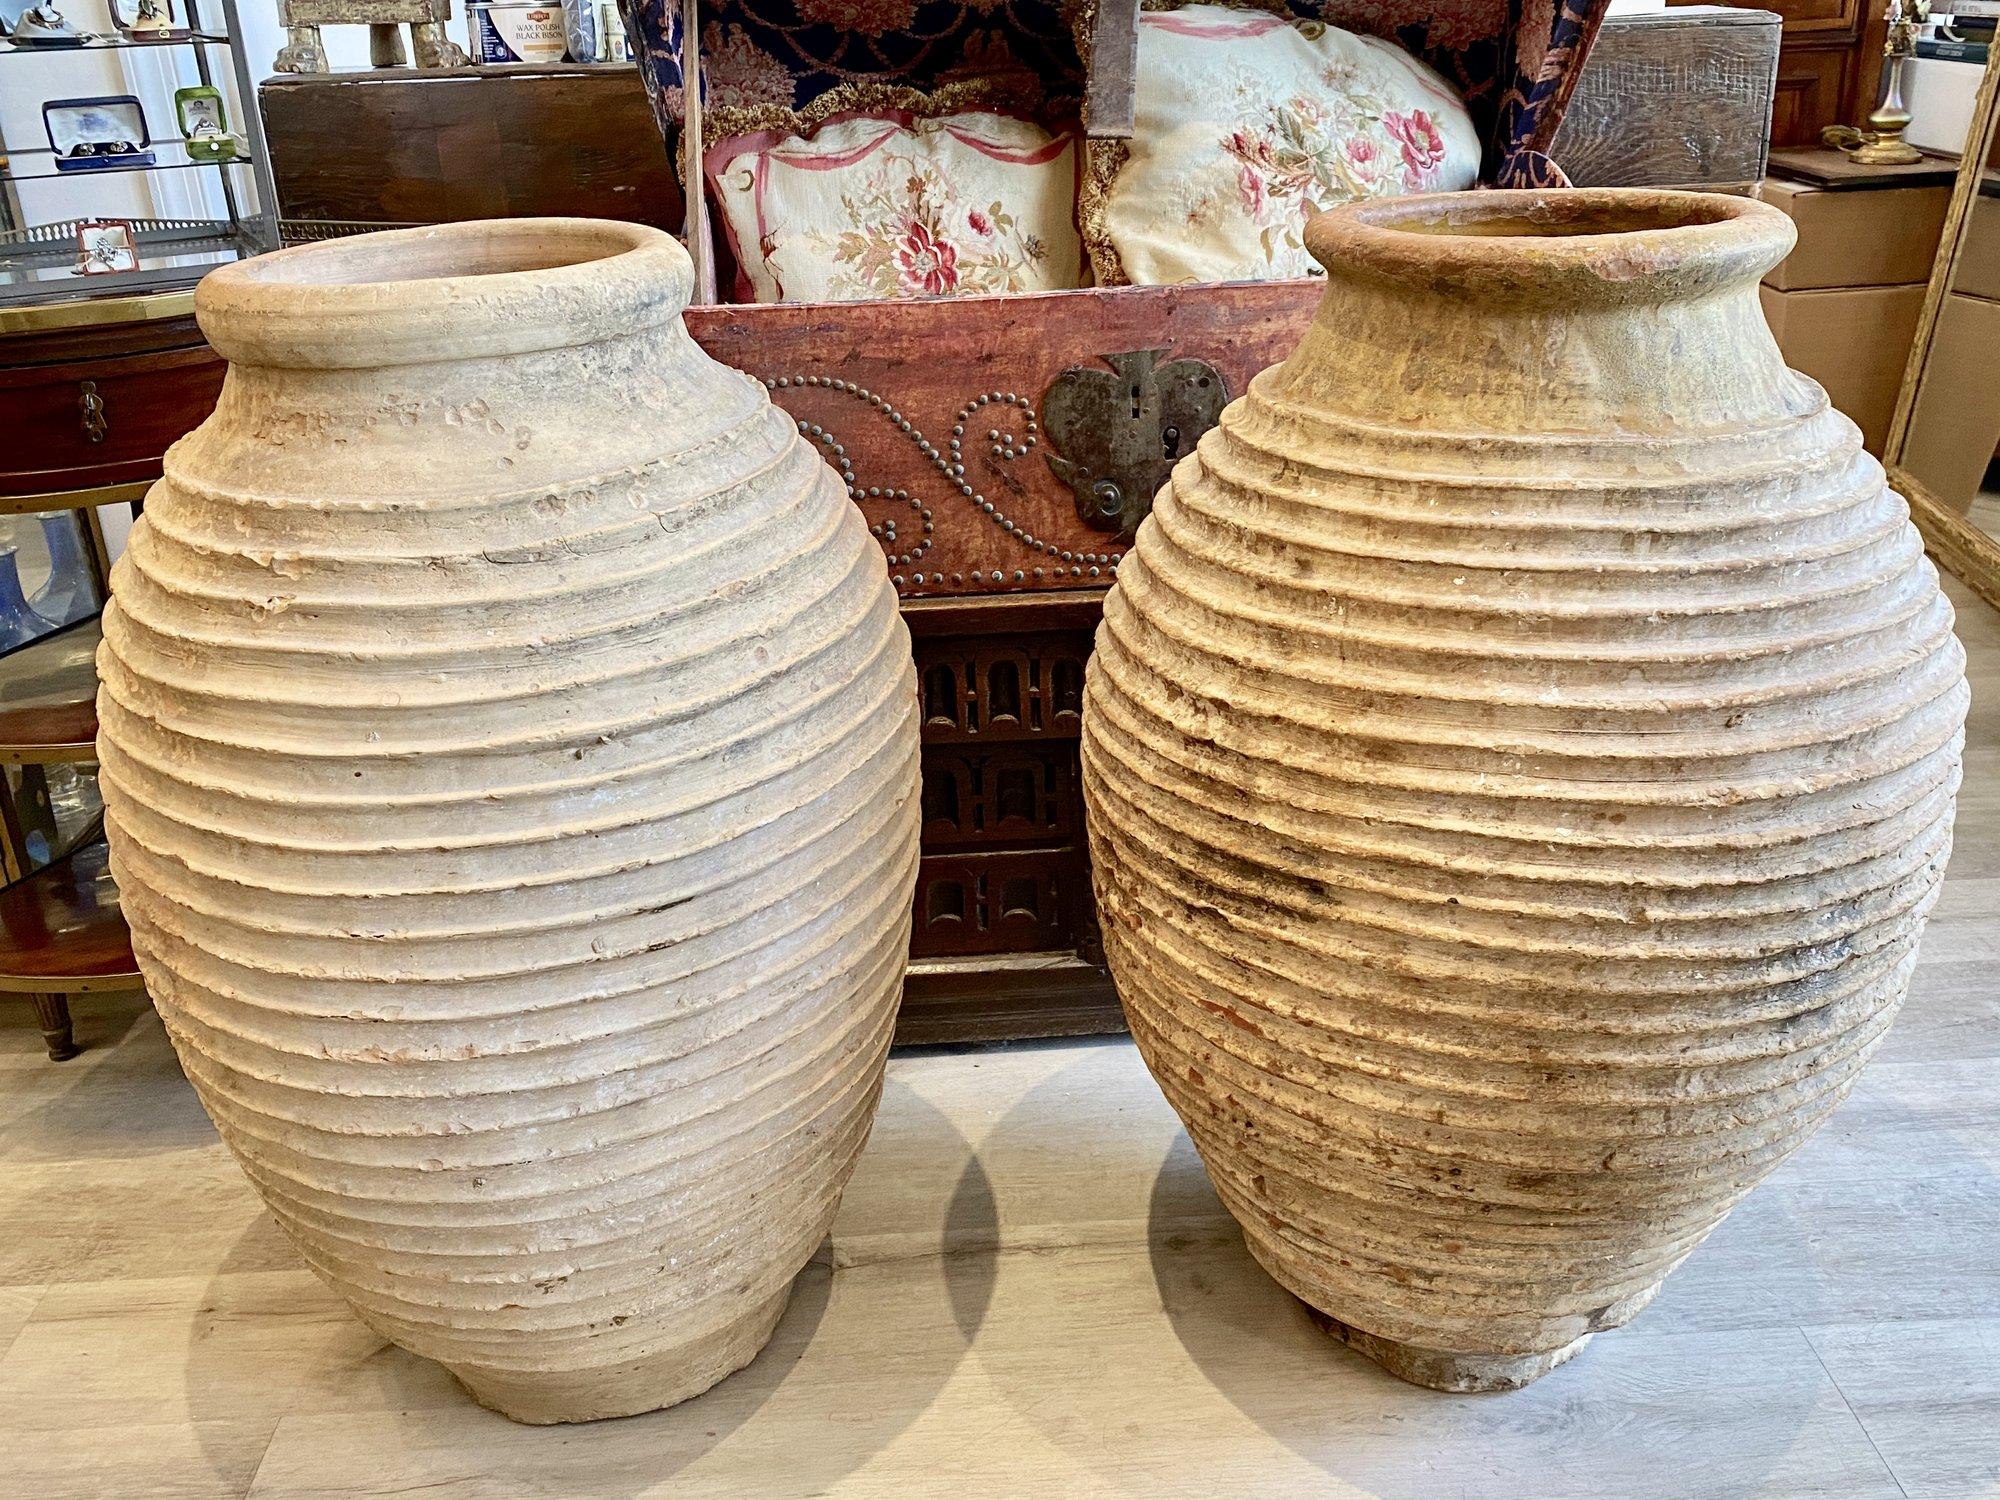 18th Century Large Peloponnesian Olive Oil Jars, Planters, Early 19th Century